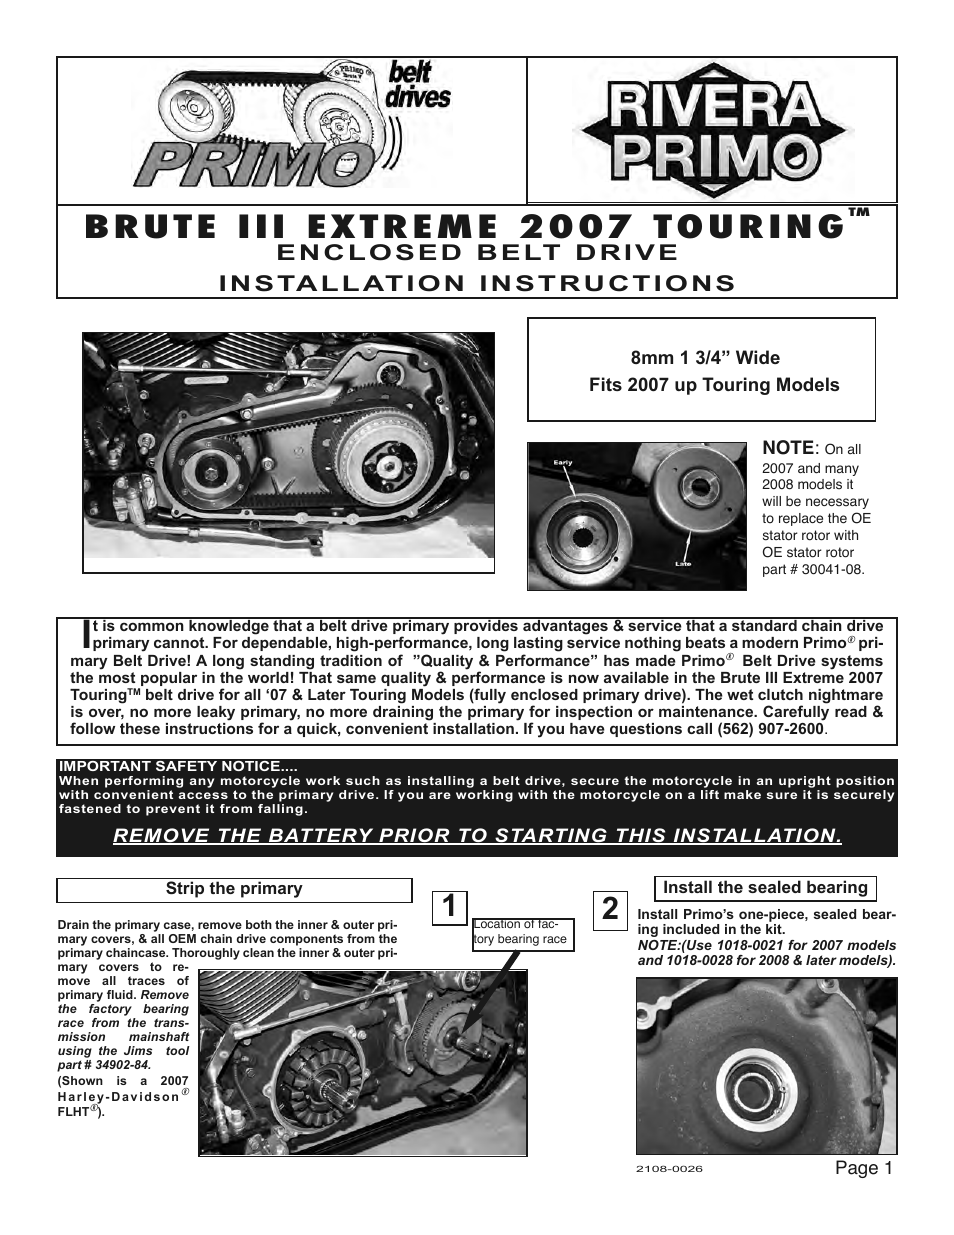 Brute III Extreme 2007 Touring Enclosed Belt Drive